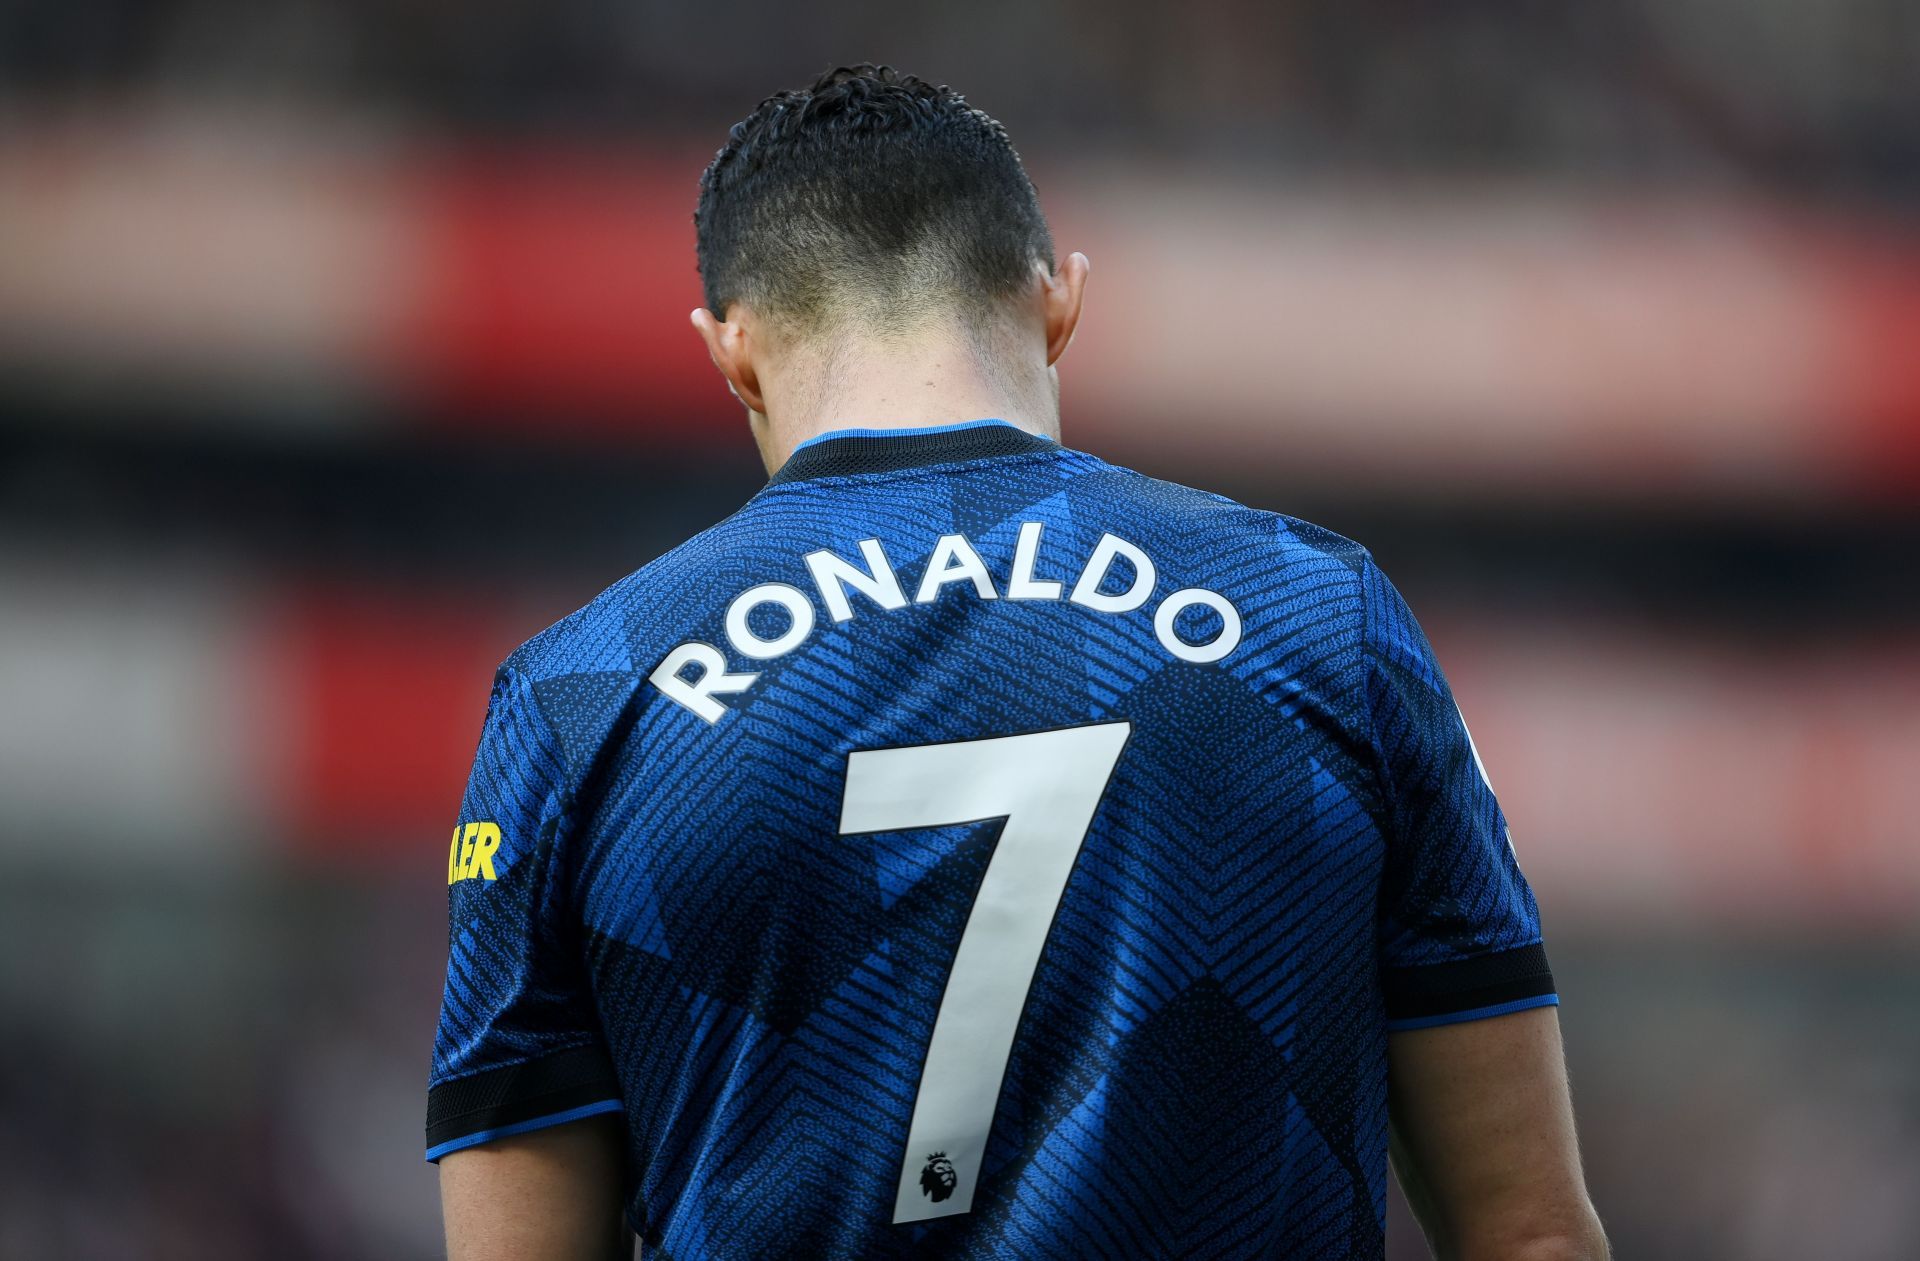 Cvristiano Ronaldo has not had the best of seasons at Manchester United